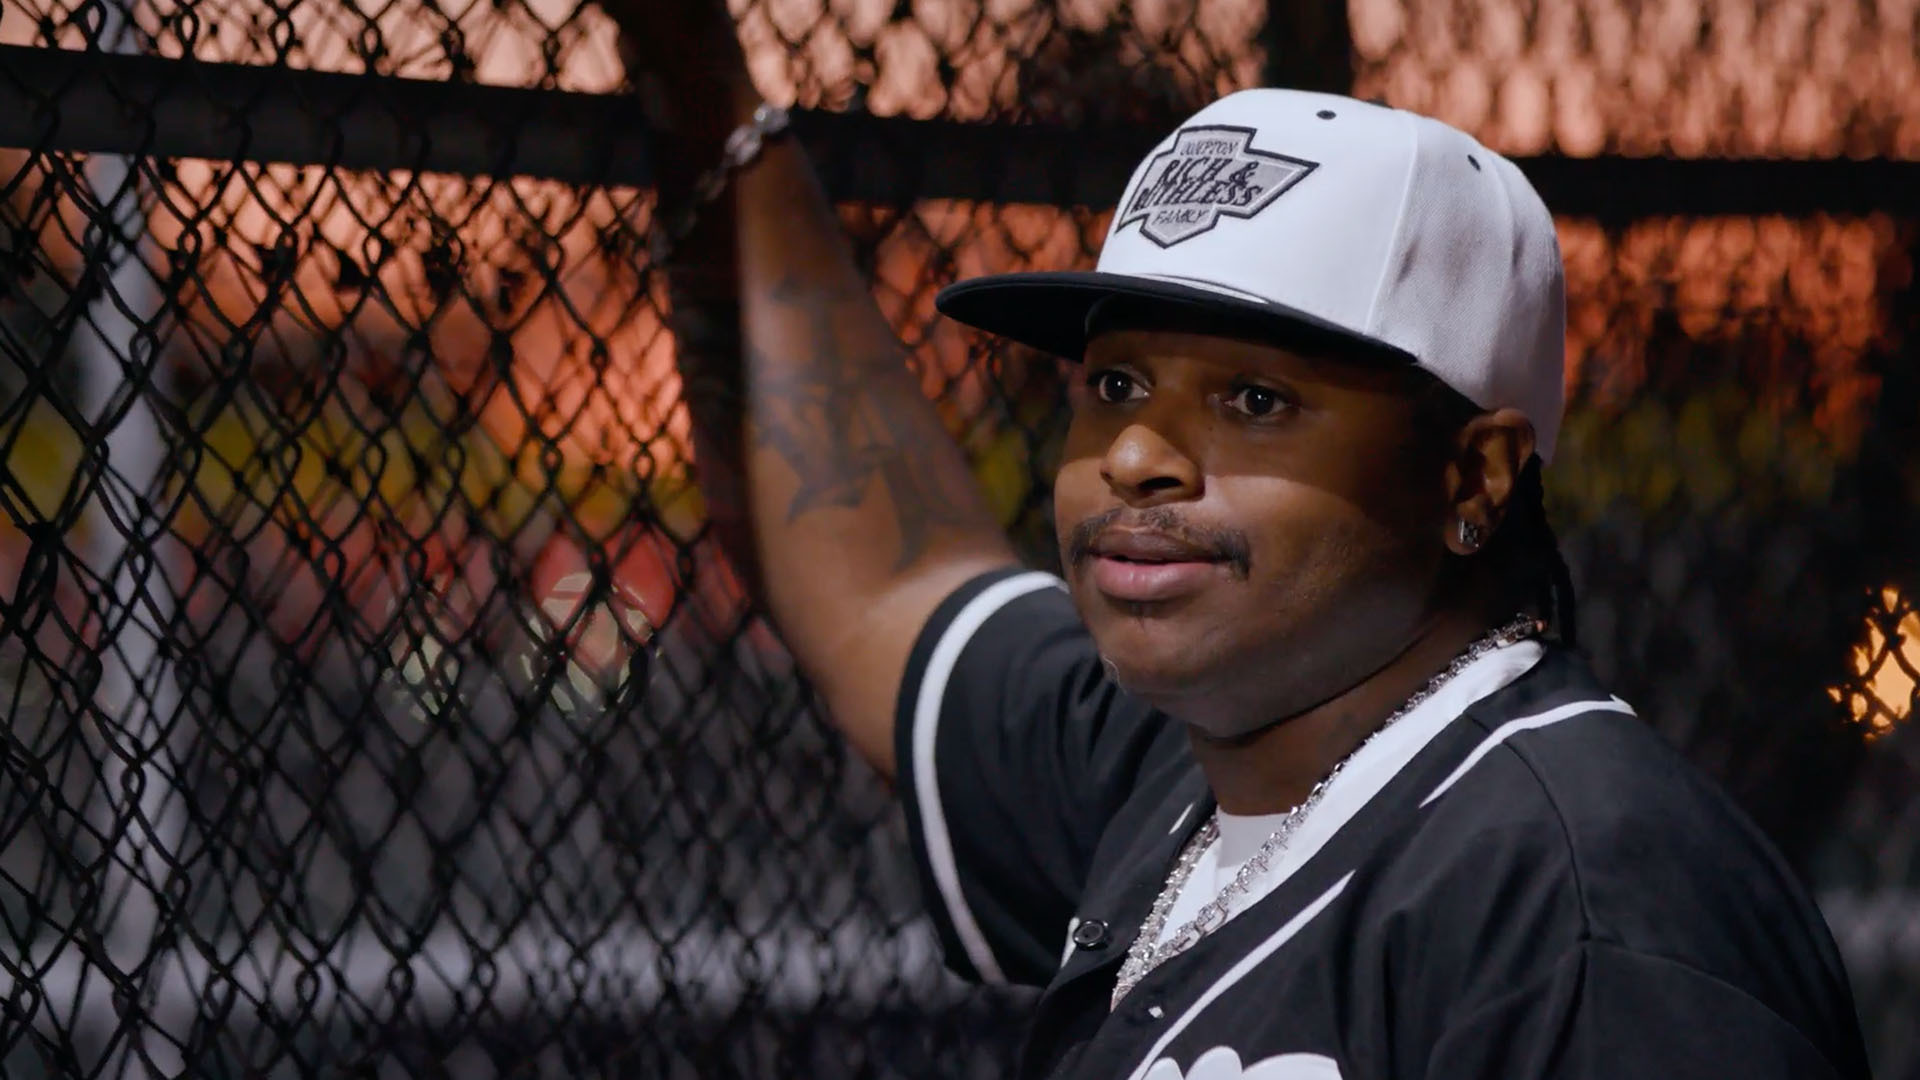 WE Ask, You Answer: Should Lil Eazy-E Invite Everyone to the Party?